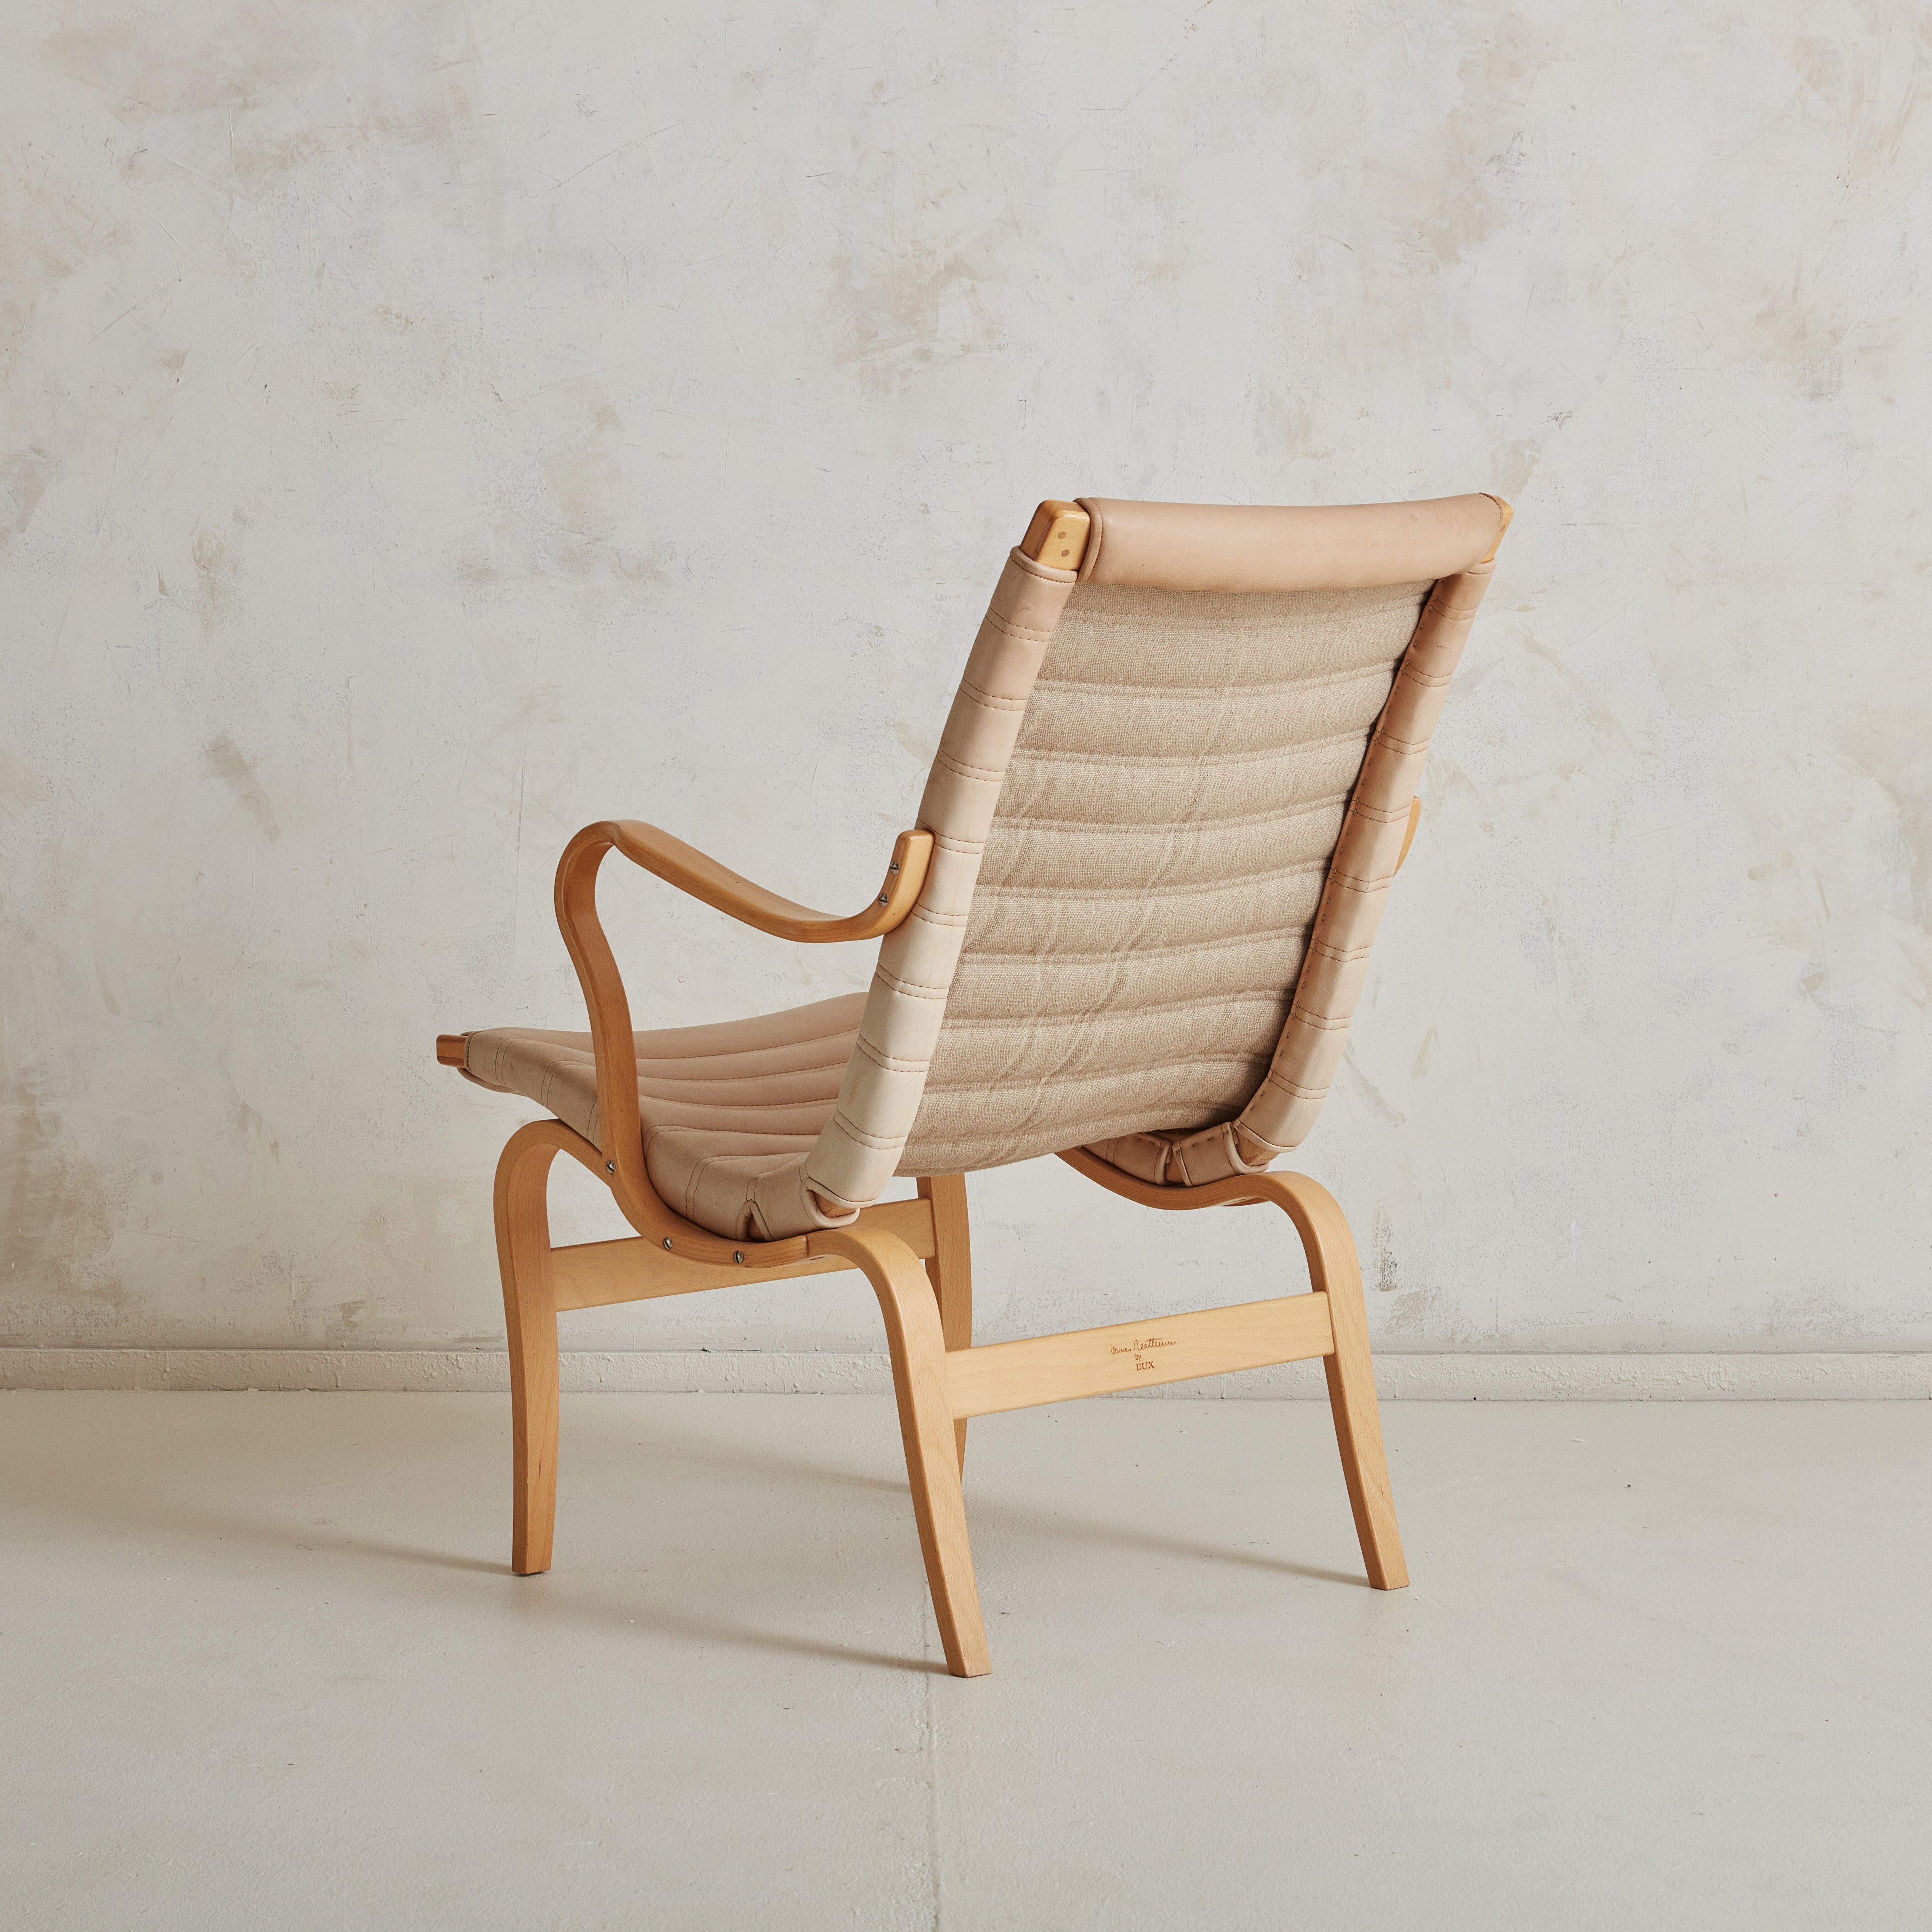 A 1960s Swedish ‘Eva’ lounge chair designed by Bruno Mathsson for DUX. This Scandinavian Modern lounge chair features a sculptural bent beechwood frame with dramatic curved arms and fluted legs. The creamy, off-white leather has natural aged patina